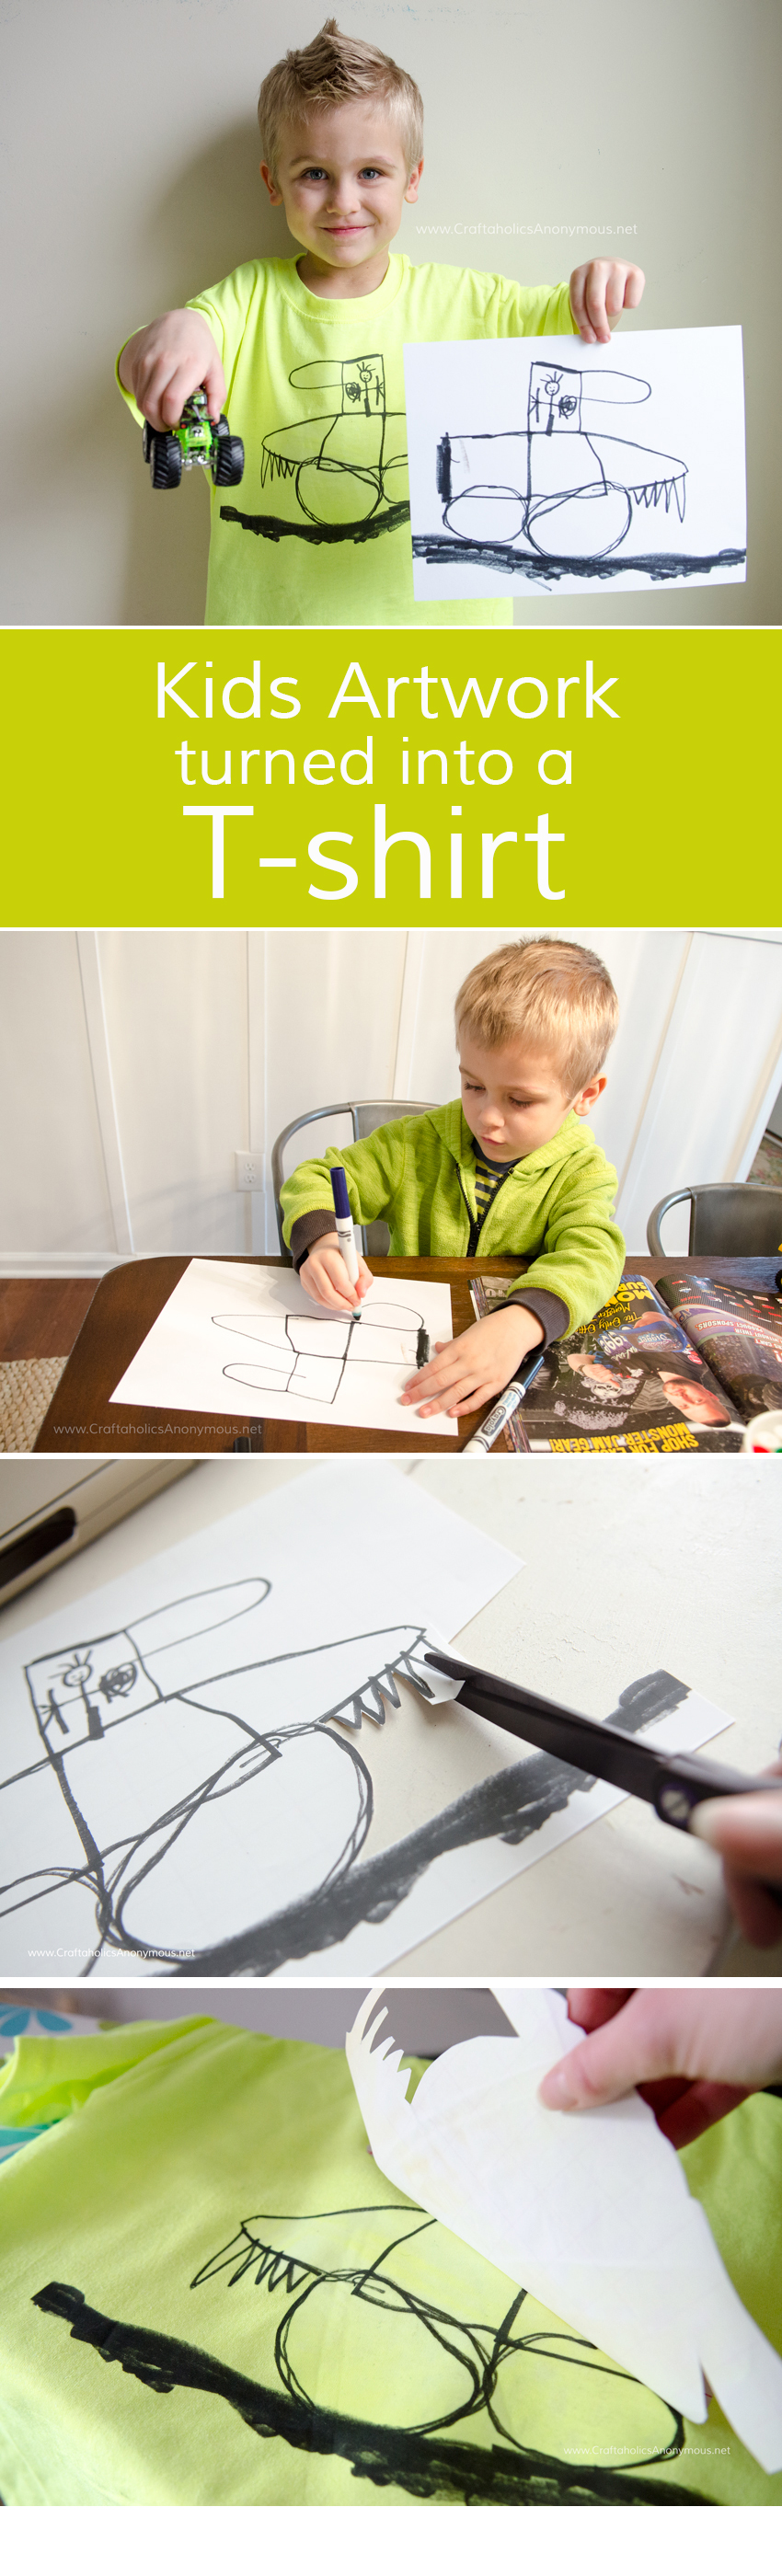 Craftaholics Anonymous®  How to Turn Kids Artwork into a T-shirt